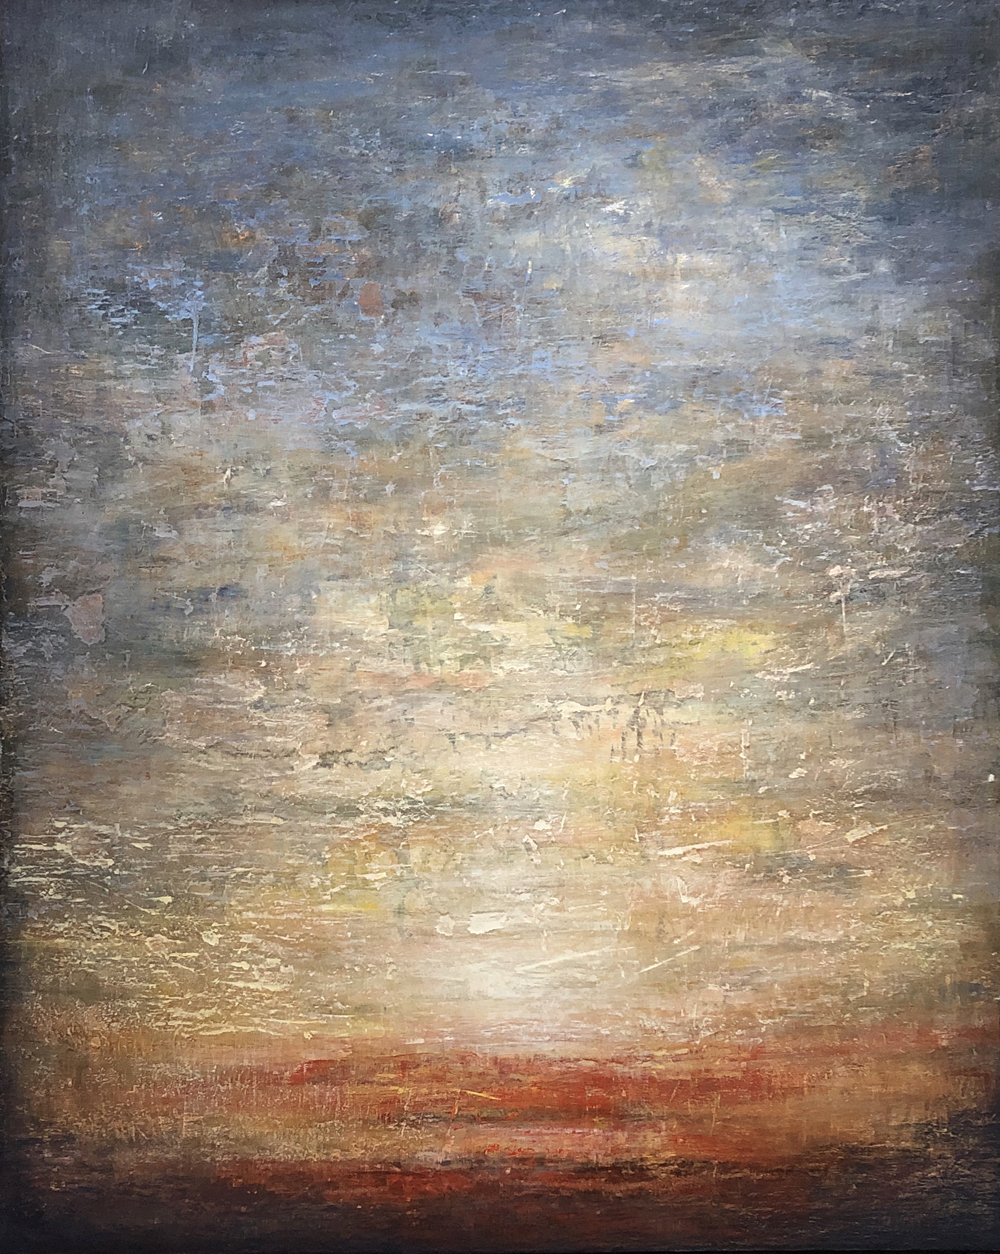 Linda Davidson, A Sunset Sunset Every Day, 2019, oil and wax on cotton on panel, 60 x 48 inches, $5500.